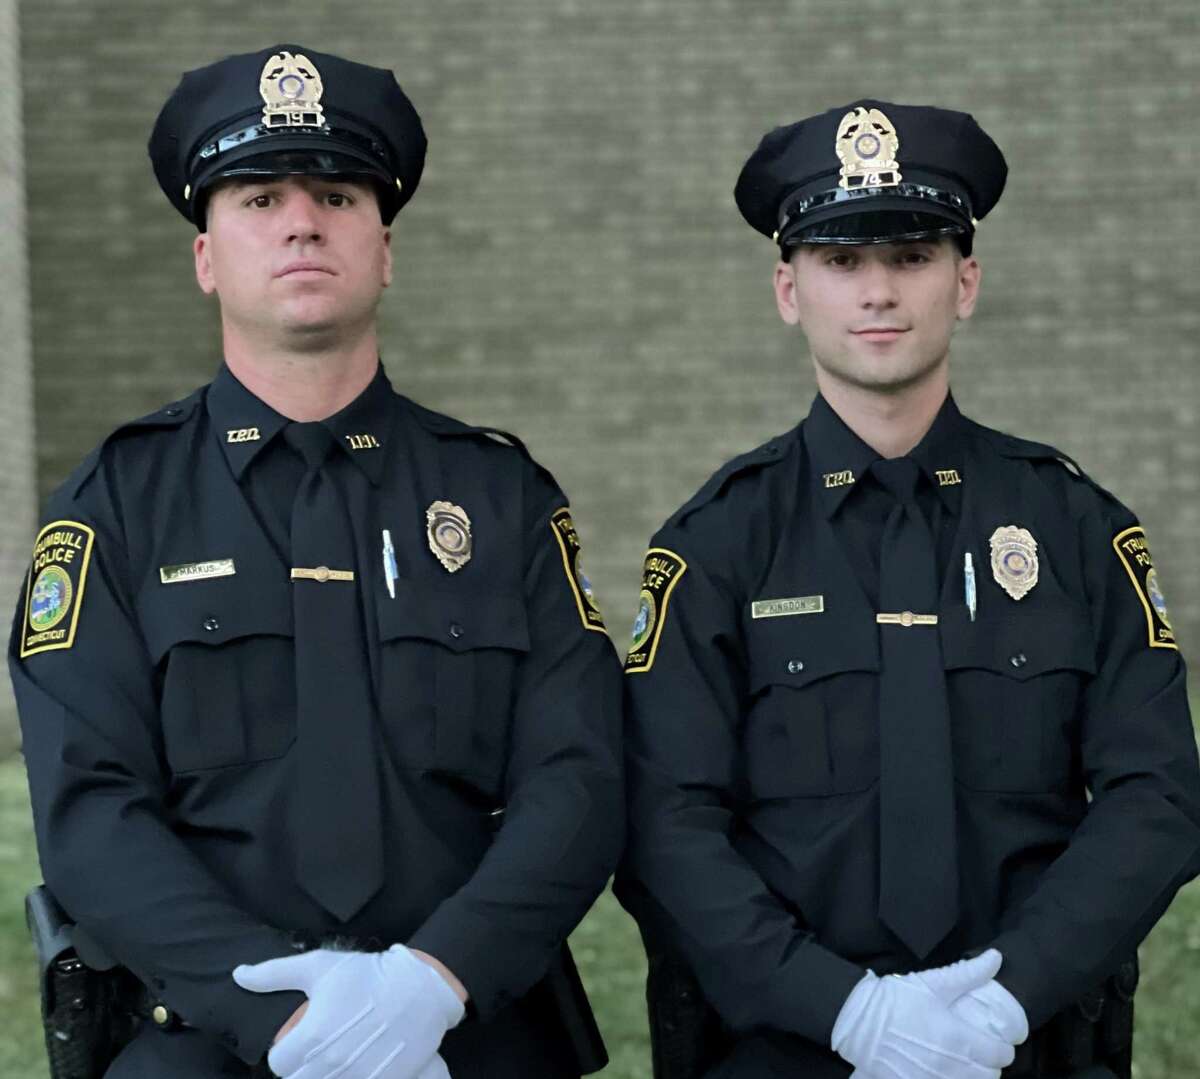 From left to right, Trumbull Police recruits Colin Markus and Jack Kingdon, who recently graduated from the Bridgeport Police Academy.